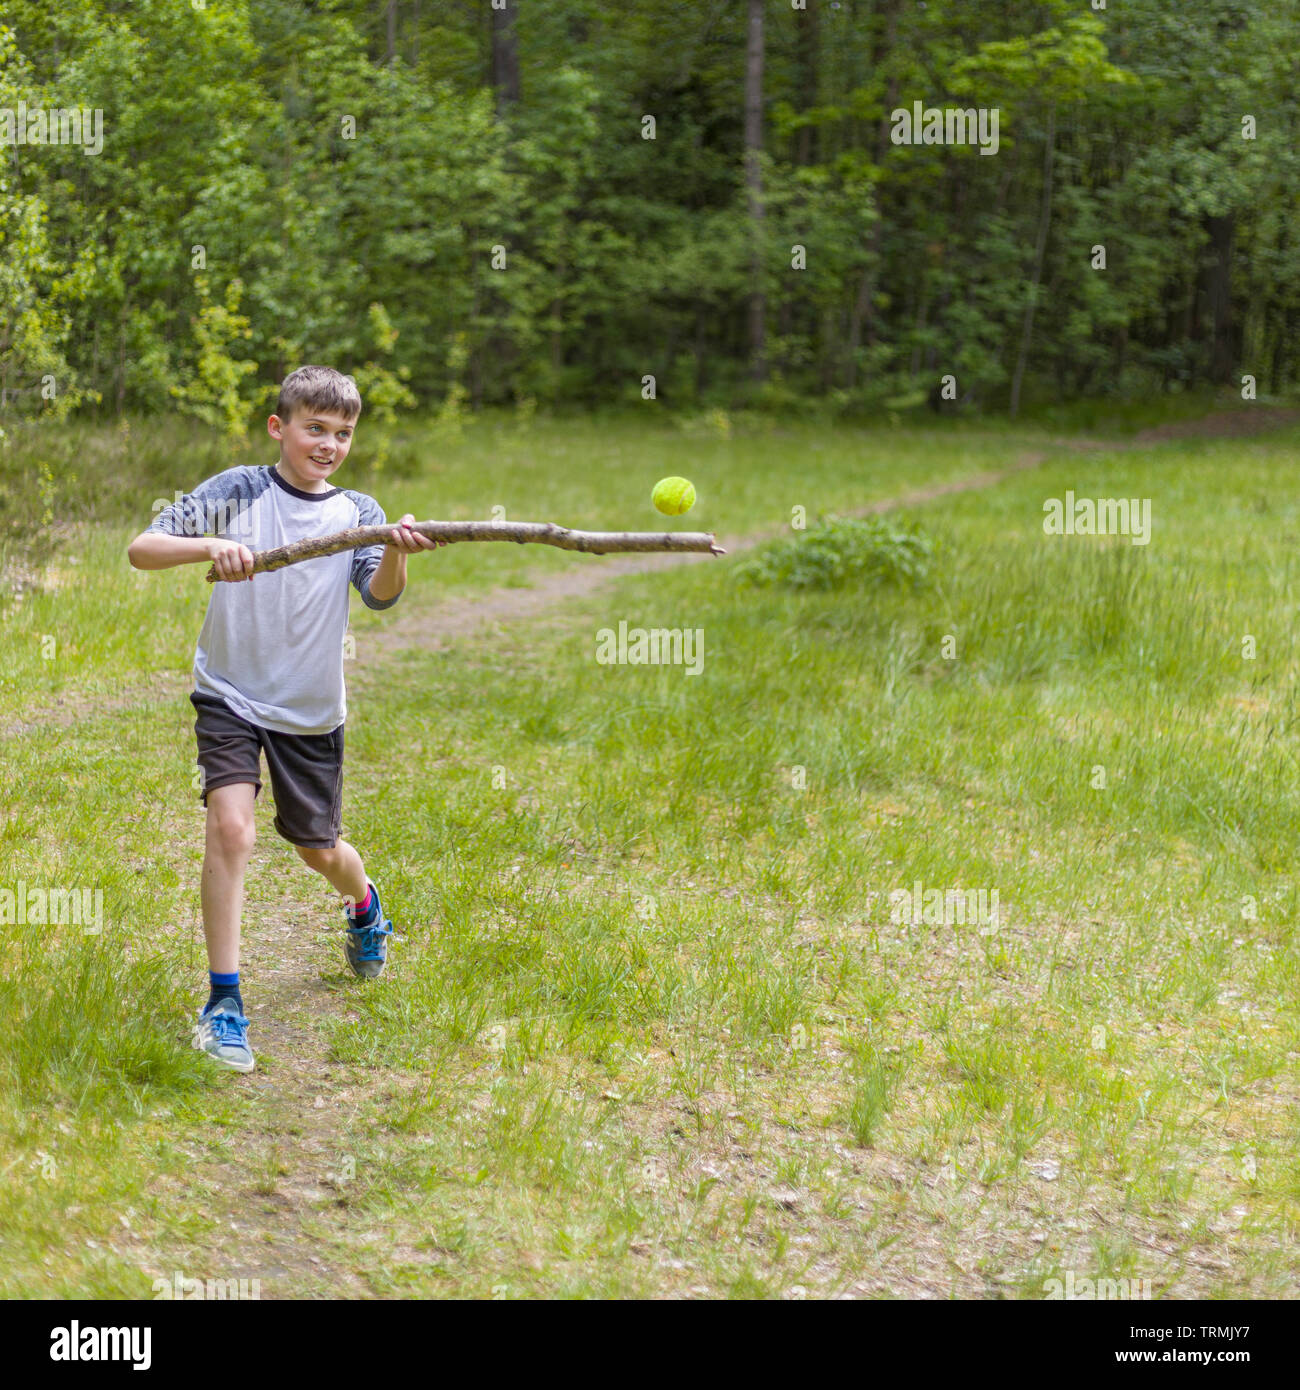 Young boy playing baseball or rounders hitting tennis ball with